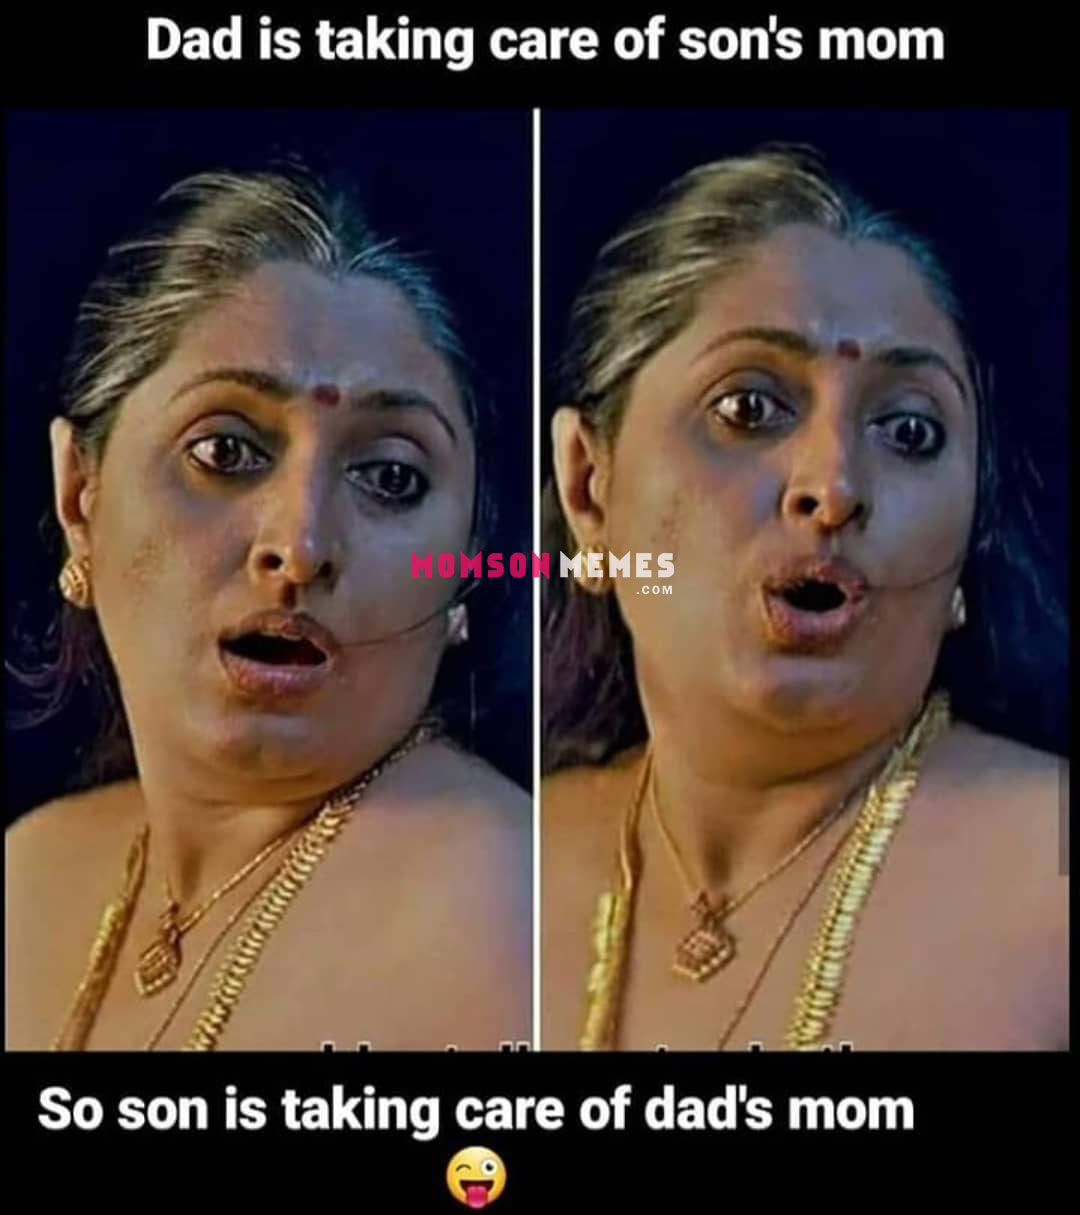 Son taking care of his dad’s mom!